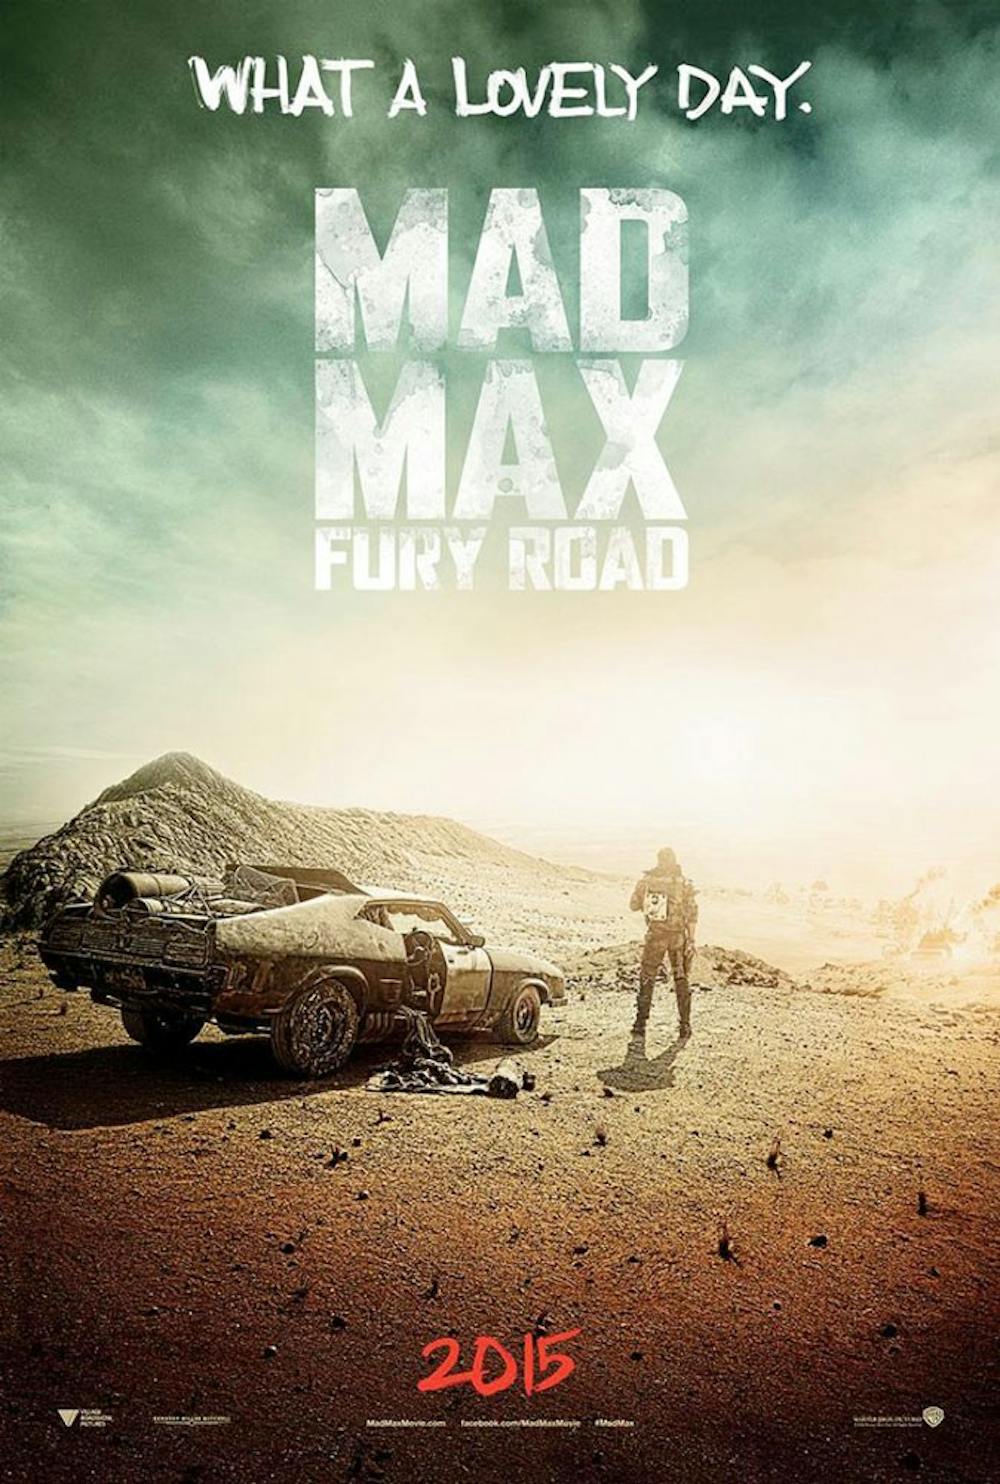 <p>The newest installment of the <em>Mad Max </em>series will be released on May 15. Since the initial release in 1979, <em>Mad Max</em> has gained a strong underground cult-like following, and fans of the film series are eagerly anticipating the comeback film.</p>